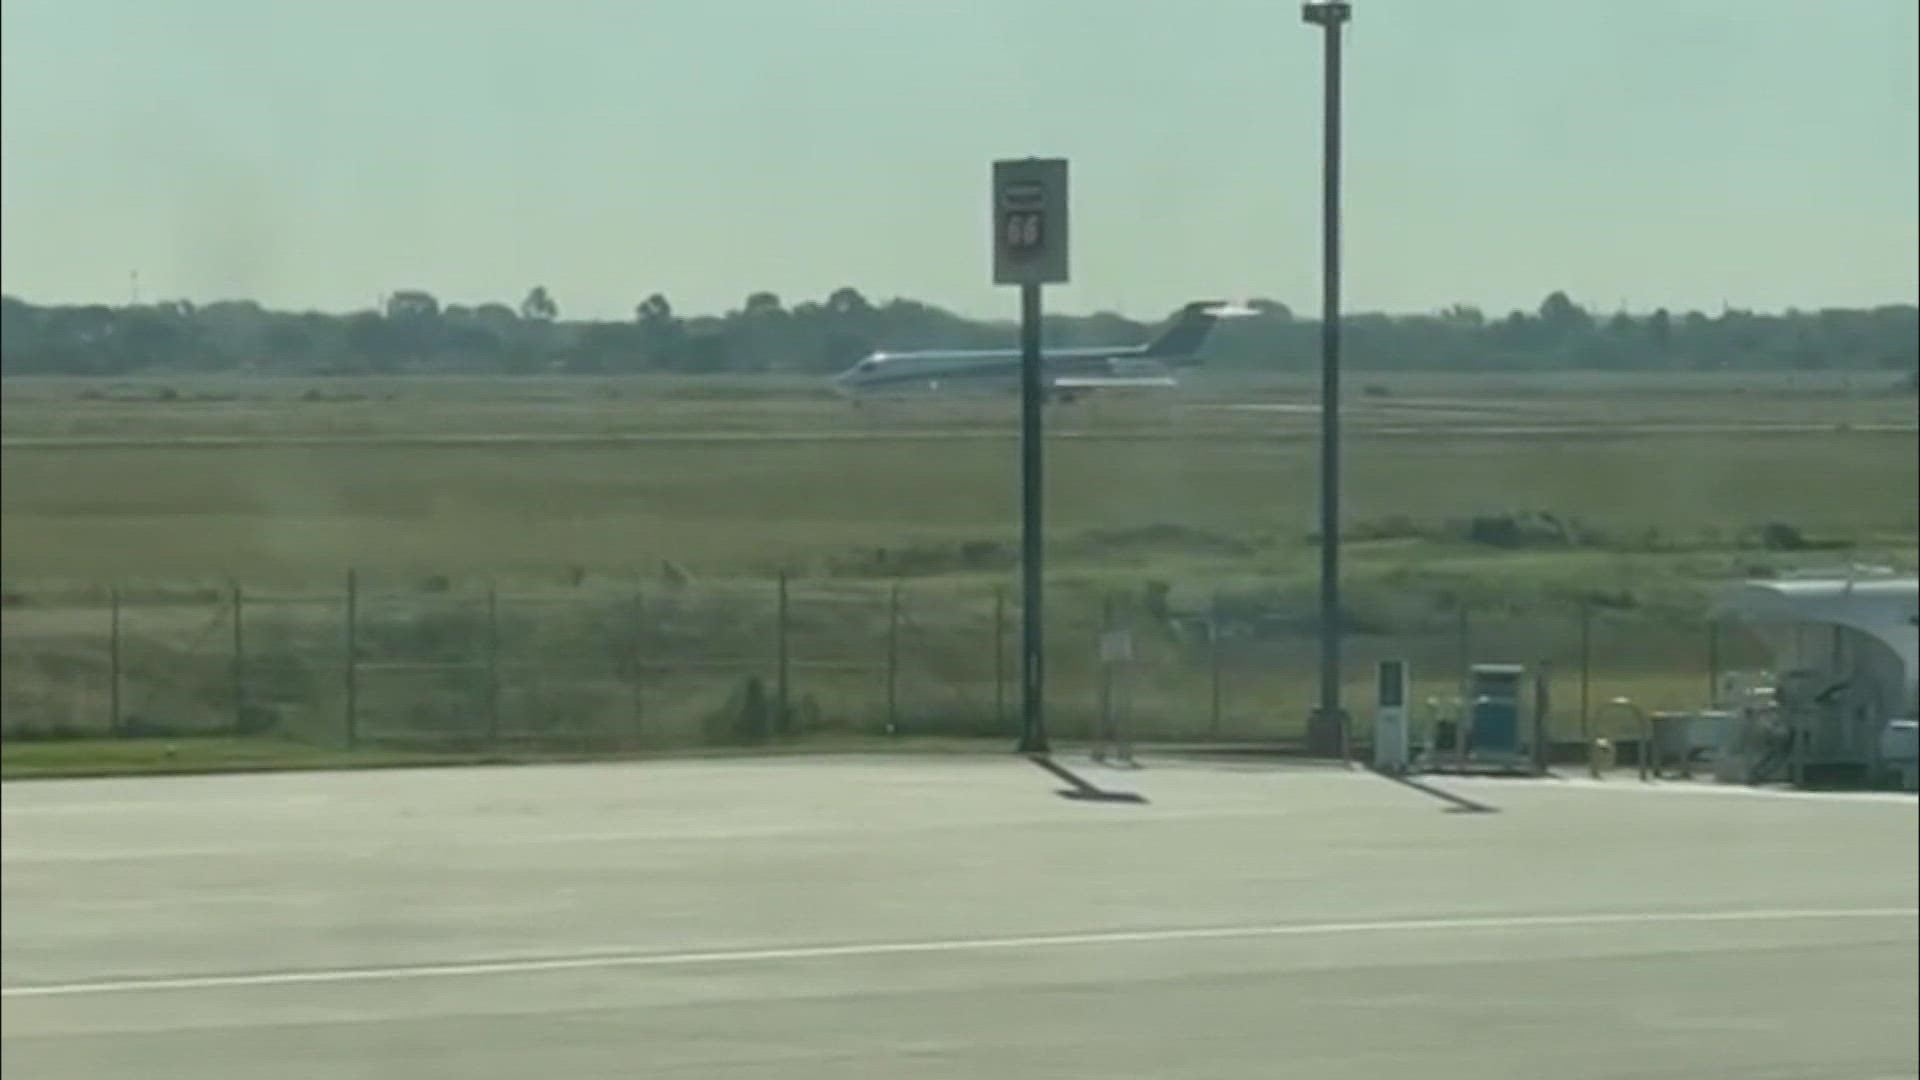 Video obtained by KHOU 11 shows a McDonnell Douglas MD-87 taxiing down the runway Tuesday morning seconds before a fiery plane crash that happened near Houston.